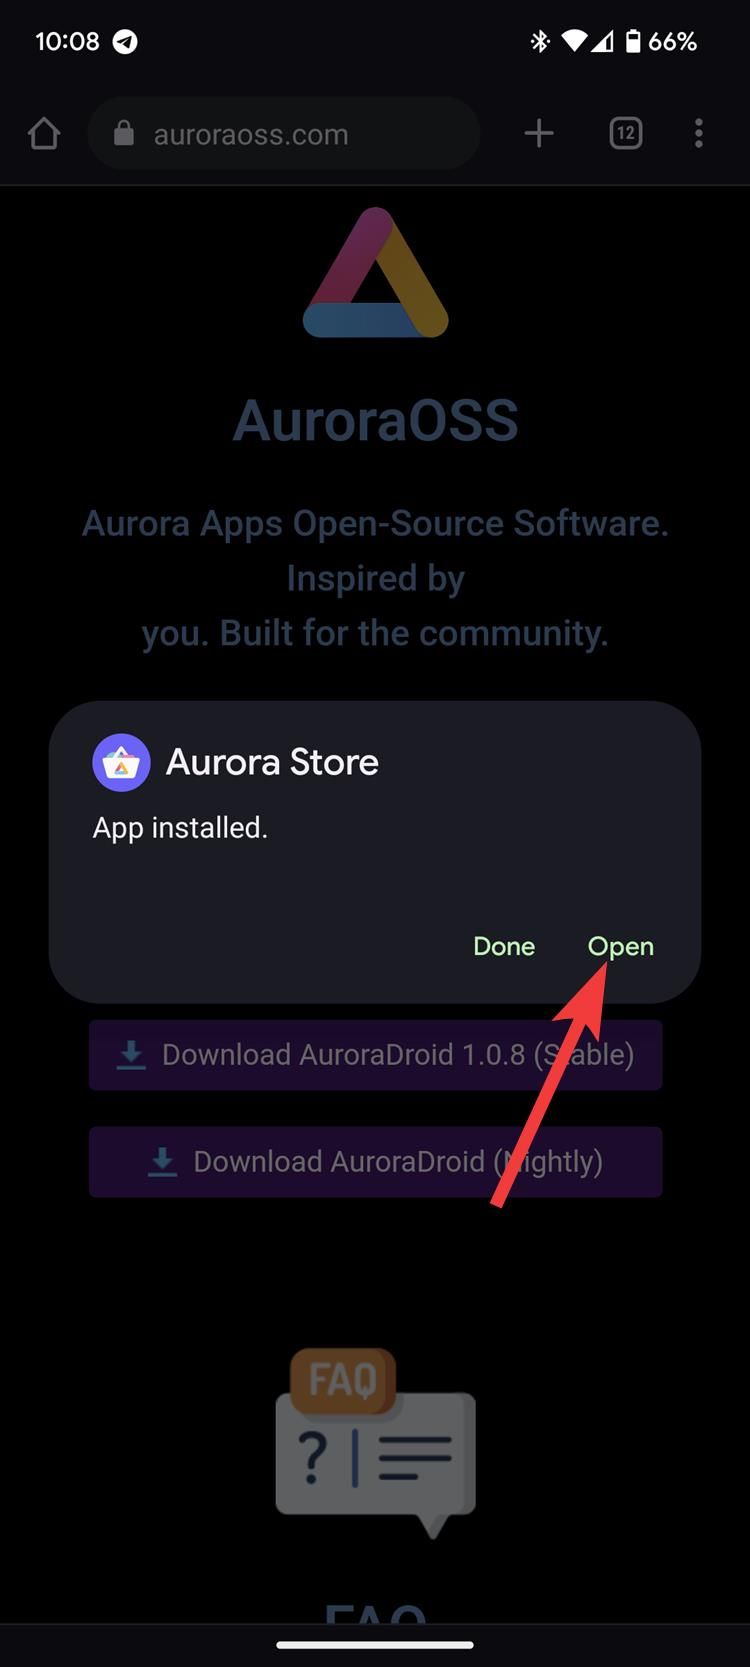 The Aurora Store dialog box letting you know the app is installed with a red arrow pointing to the Open button